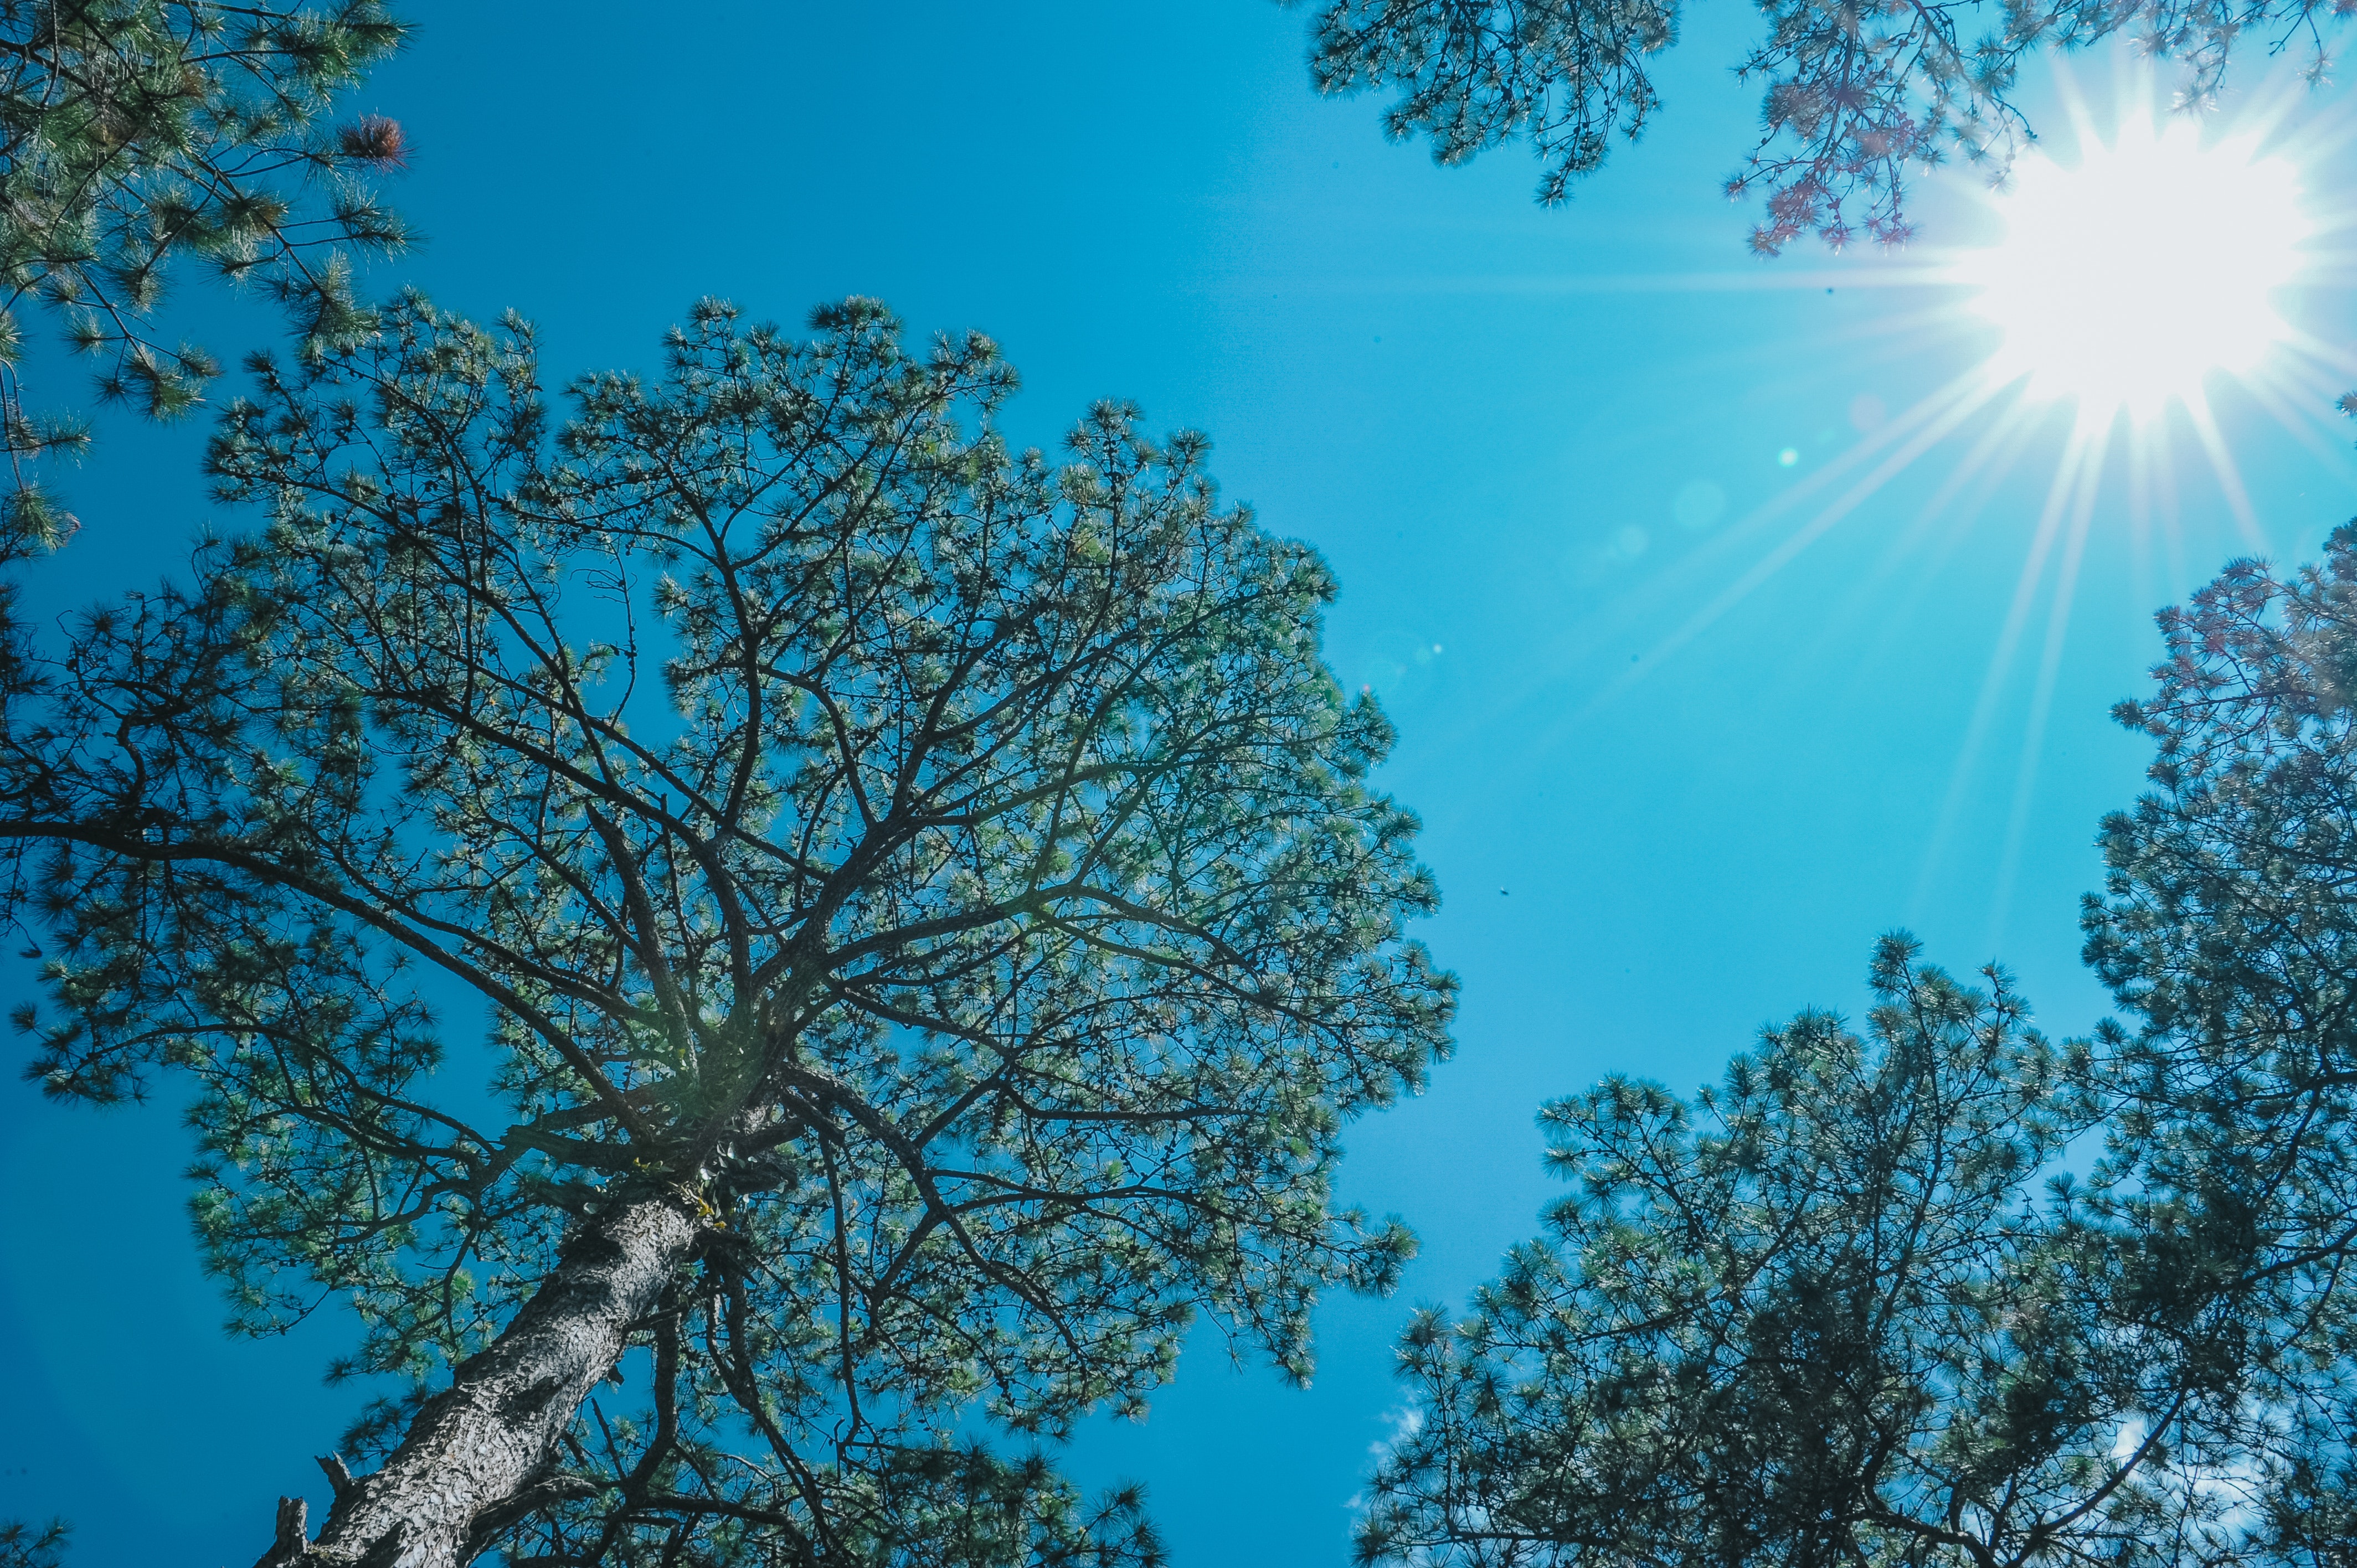 Trees Under the Sun, Blue skies, Outdoors, Trees, Tree, HQ Photo